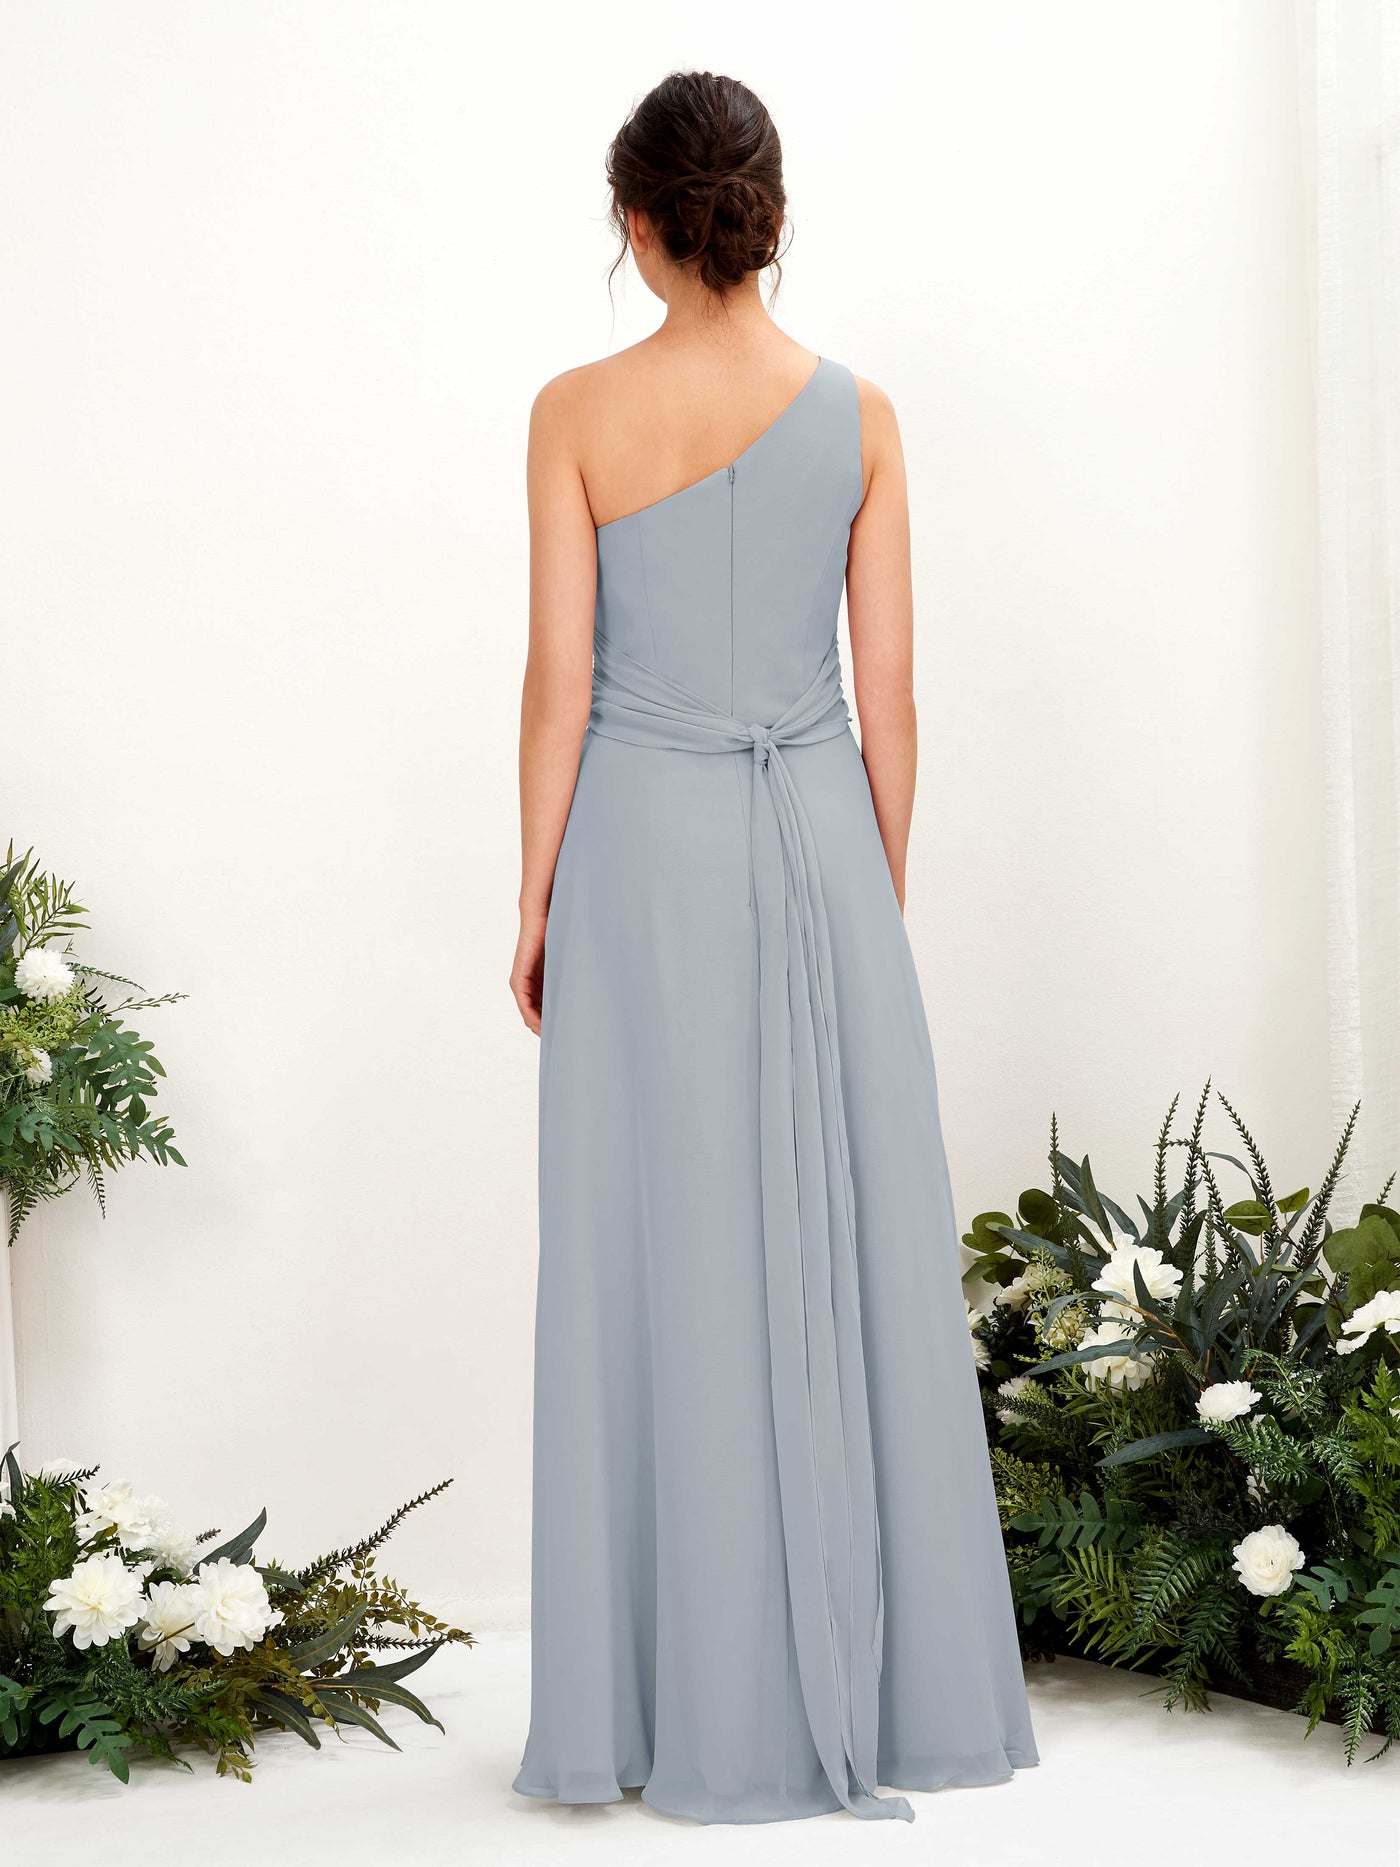 Dusty Blue-Upgrade Bridesmaid Dresses Bridesmaid Dress A-line Chiffon One Shoulder Full Length Sleeveless Wedding Party Dress (81224704)#color_dusty-blue-upgrade